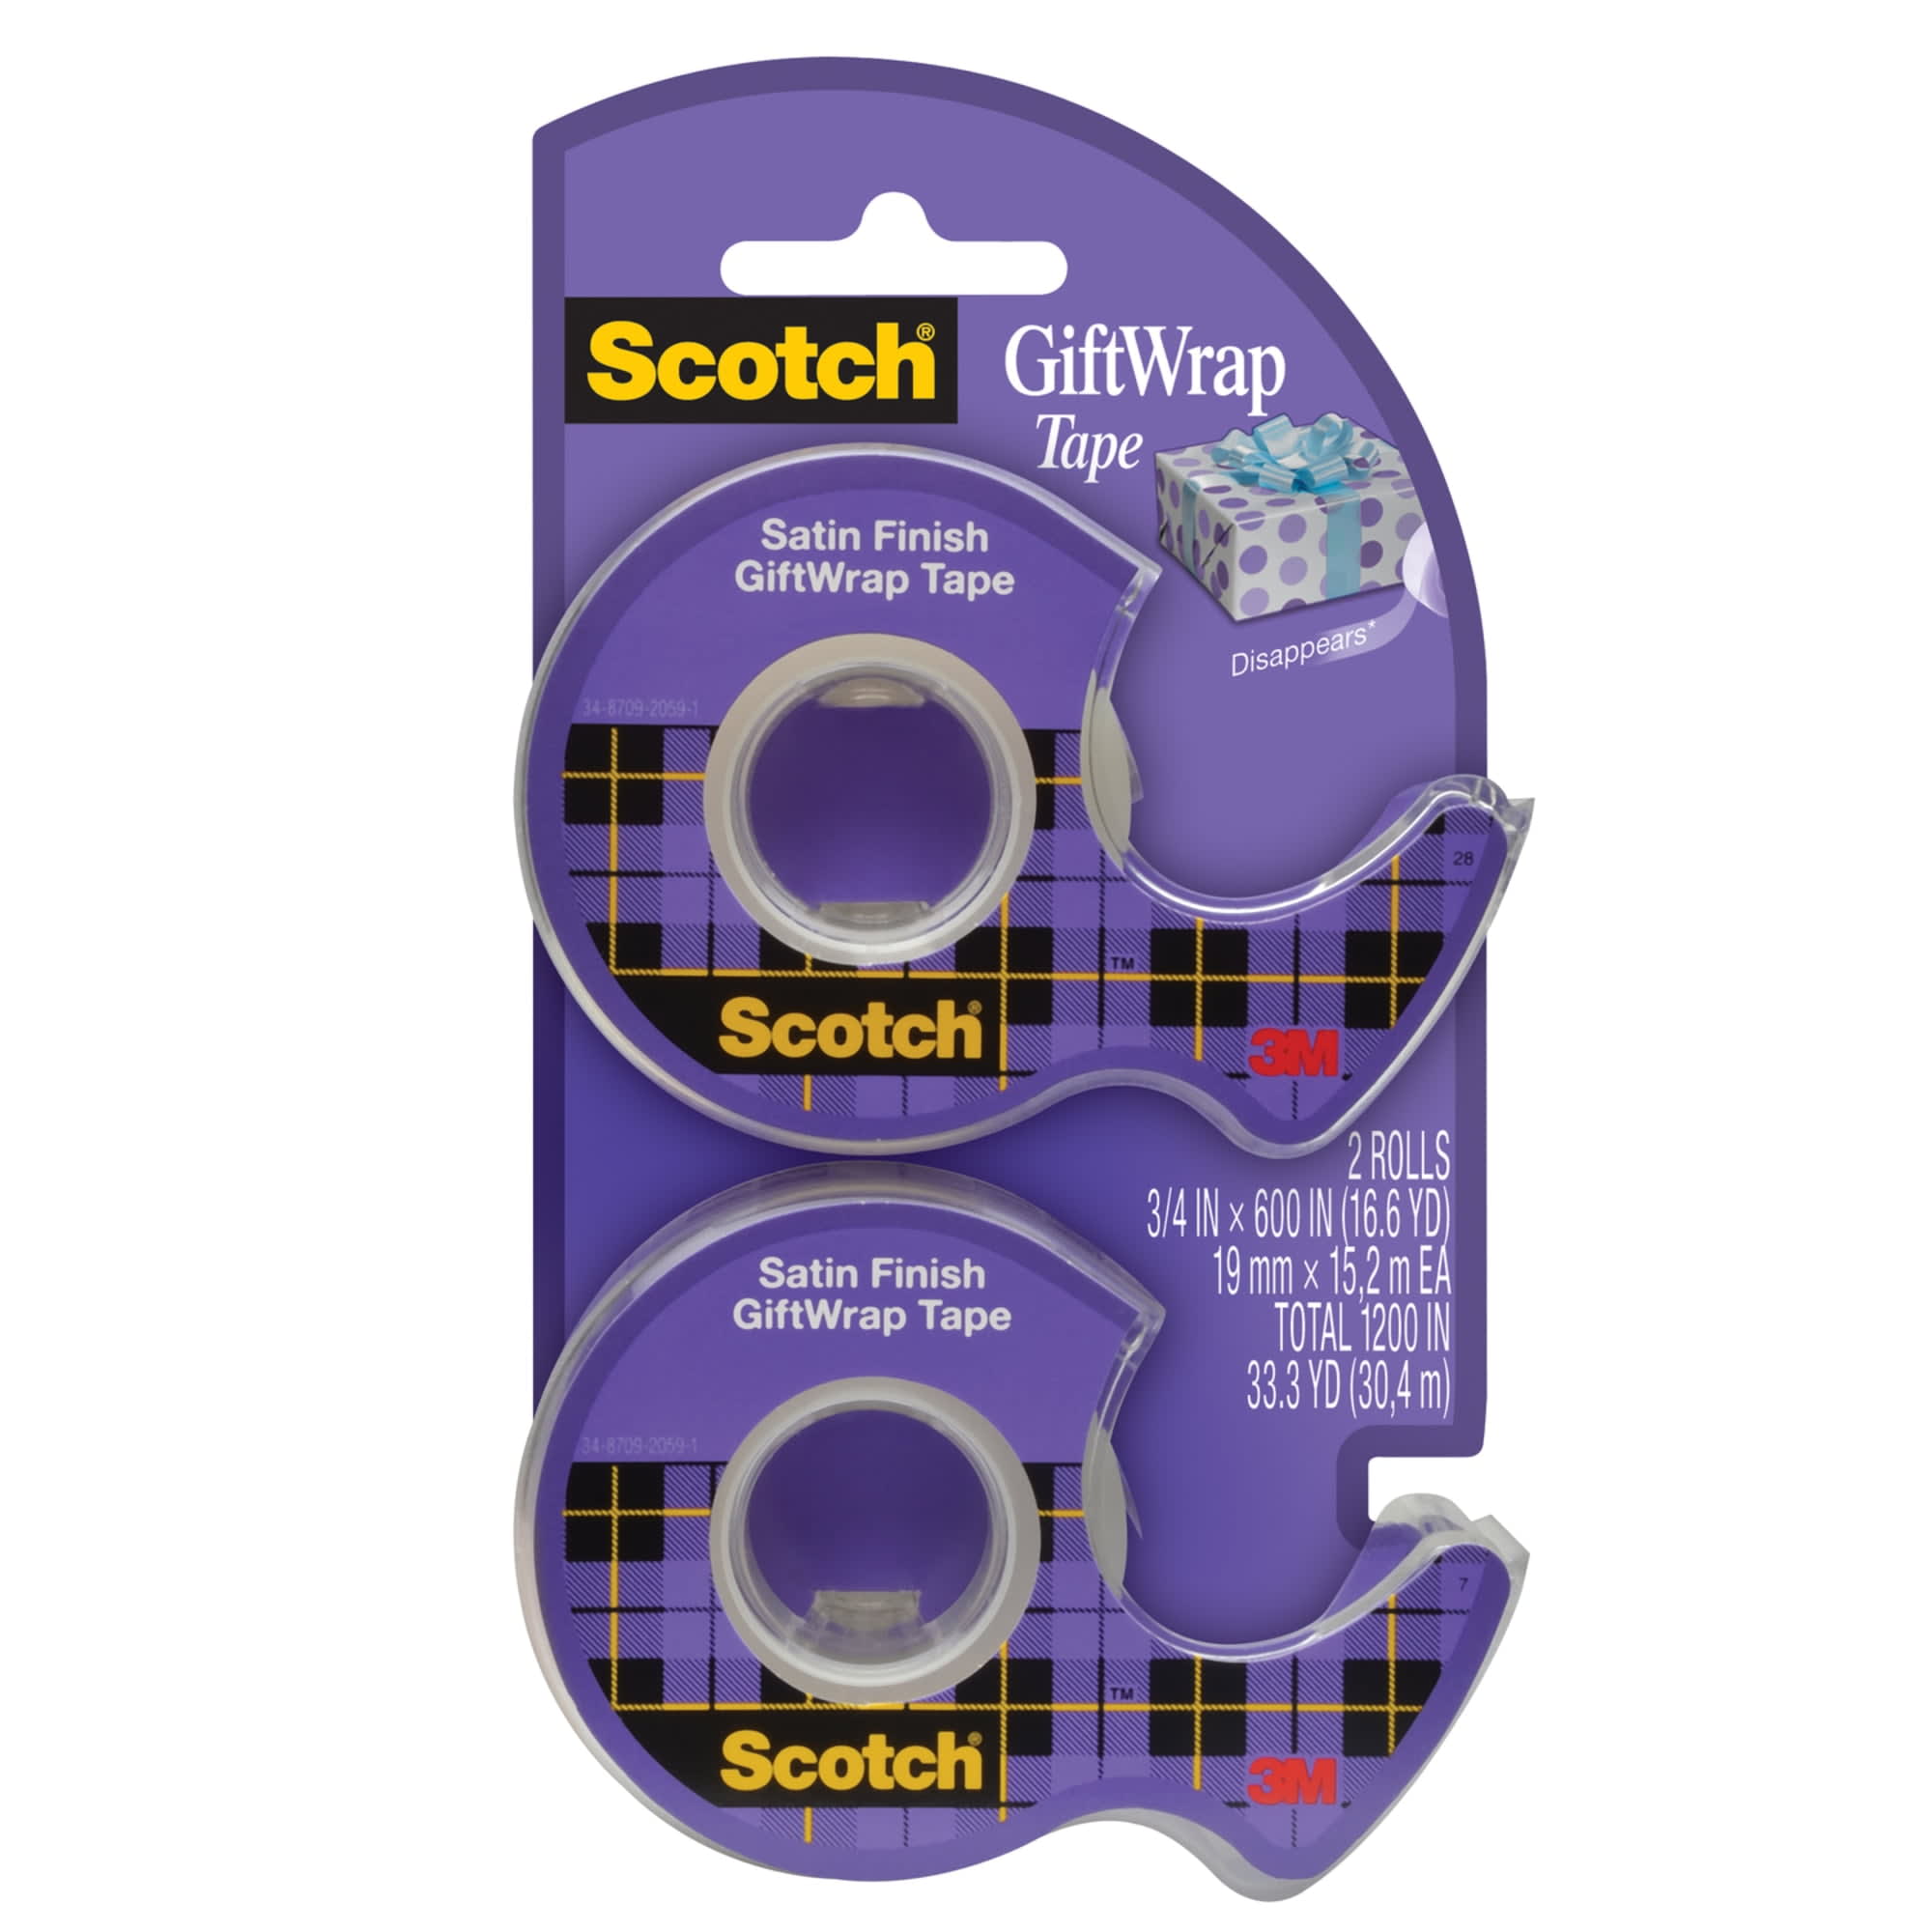 Scotch Satin Gift Wrap Tape 34 x 600 Clear Pack Of 2 Rolls